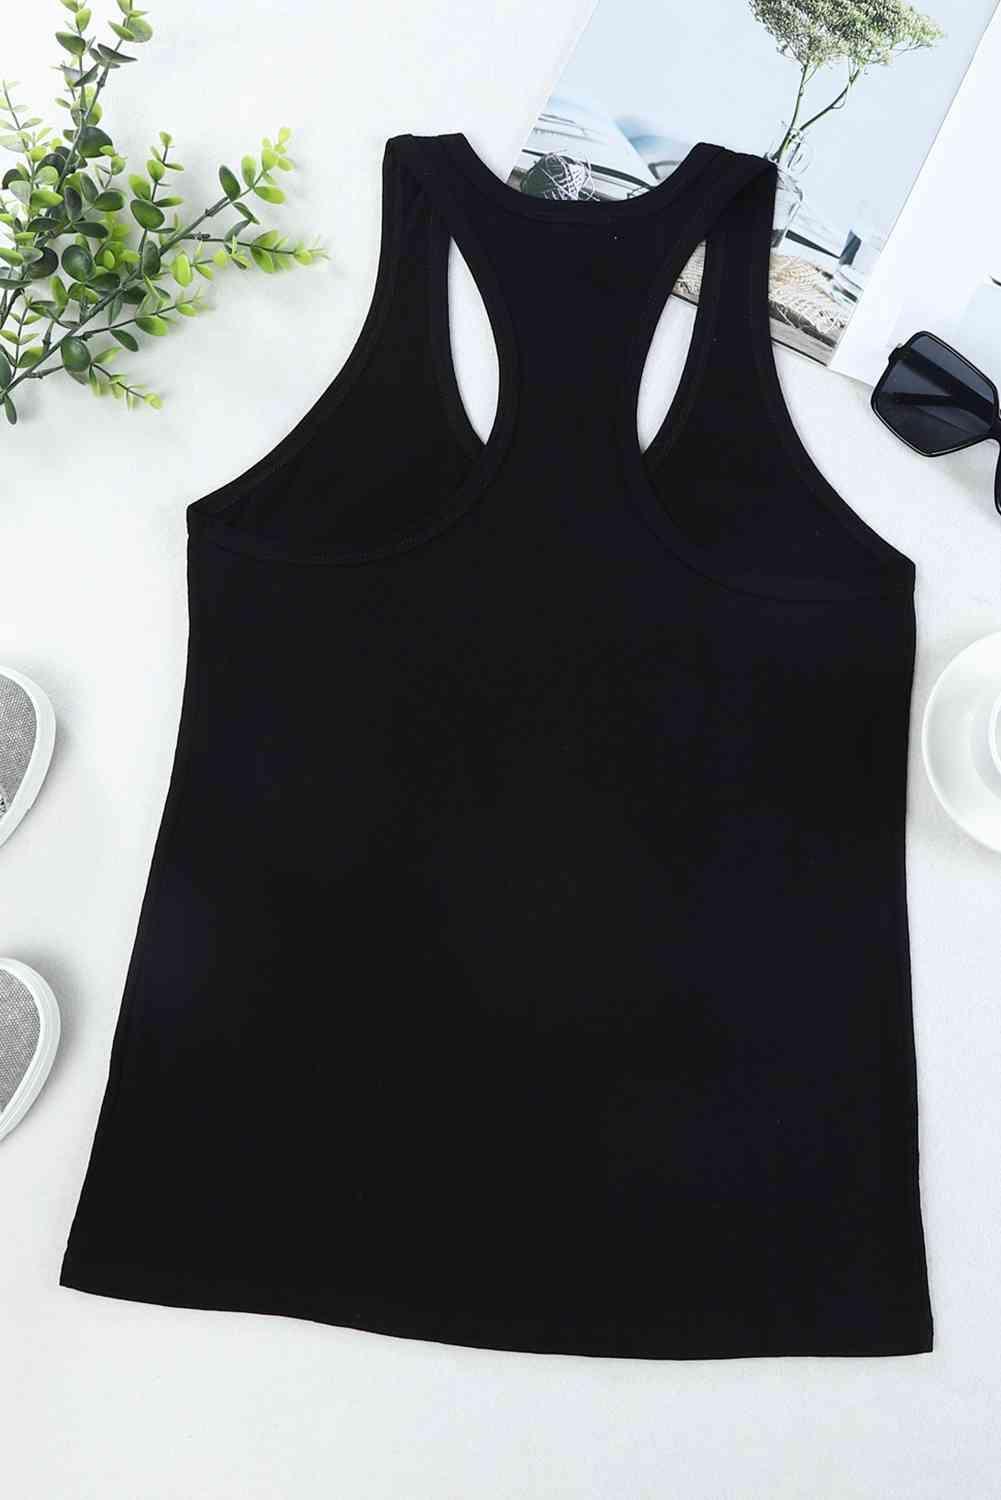 a women's black tank top with cutouts on the back